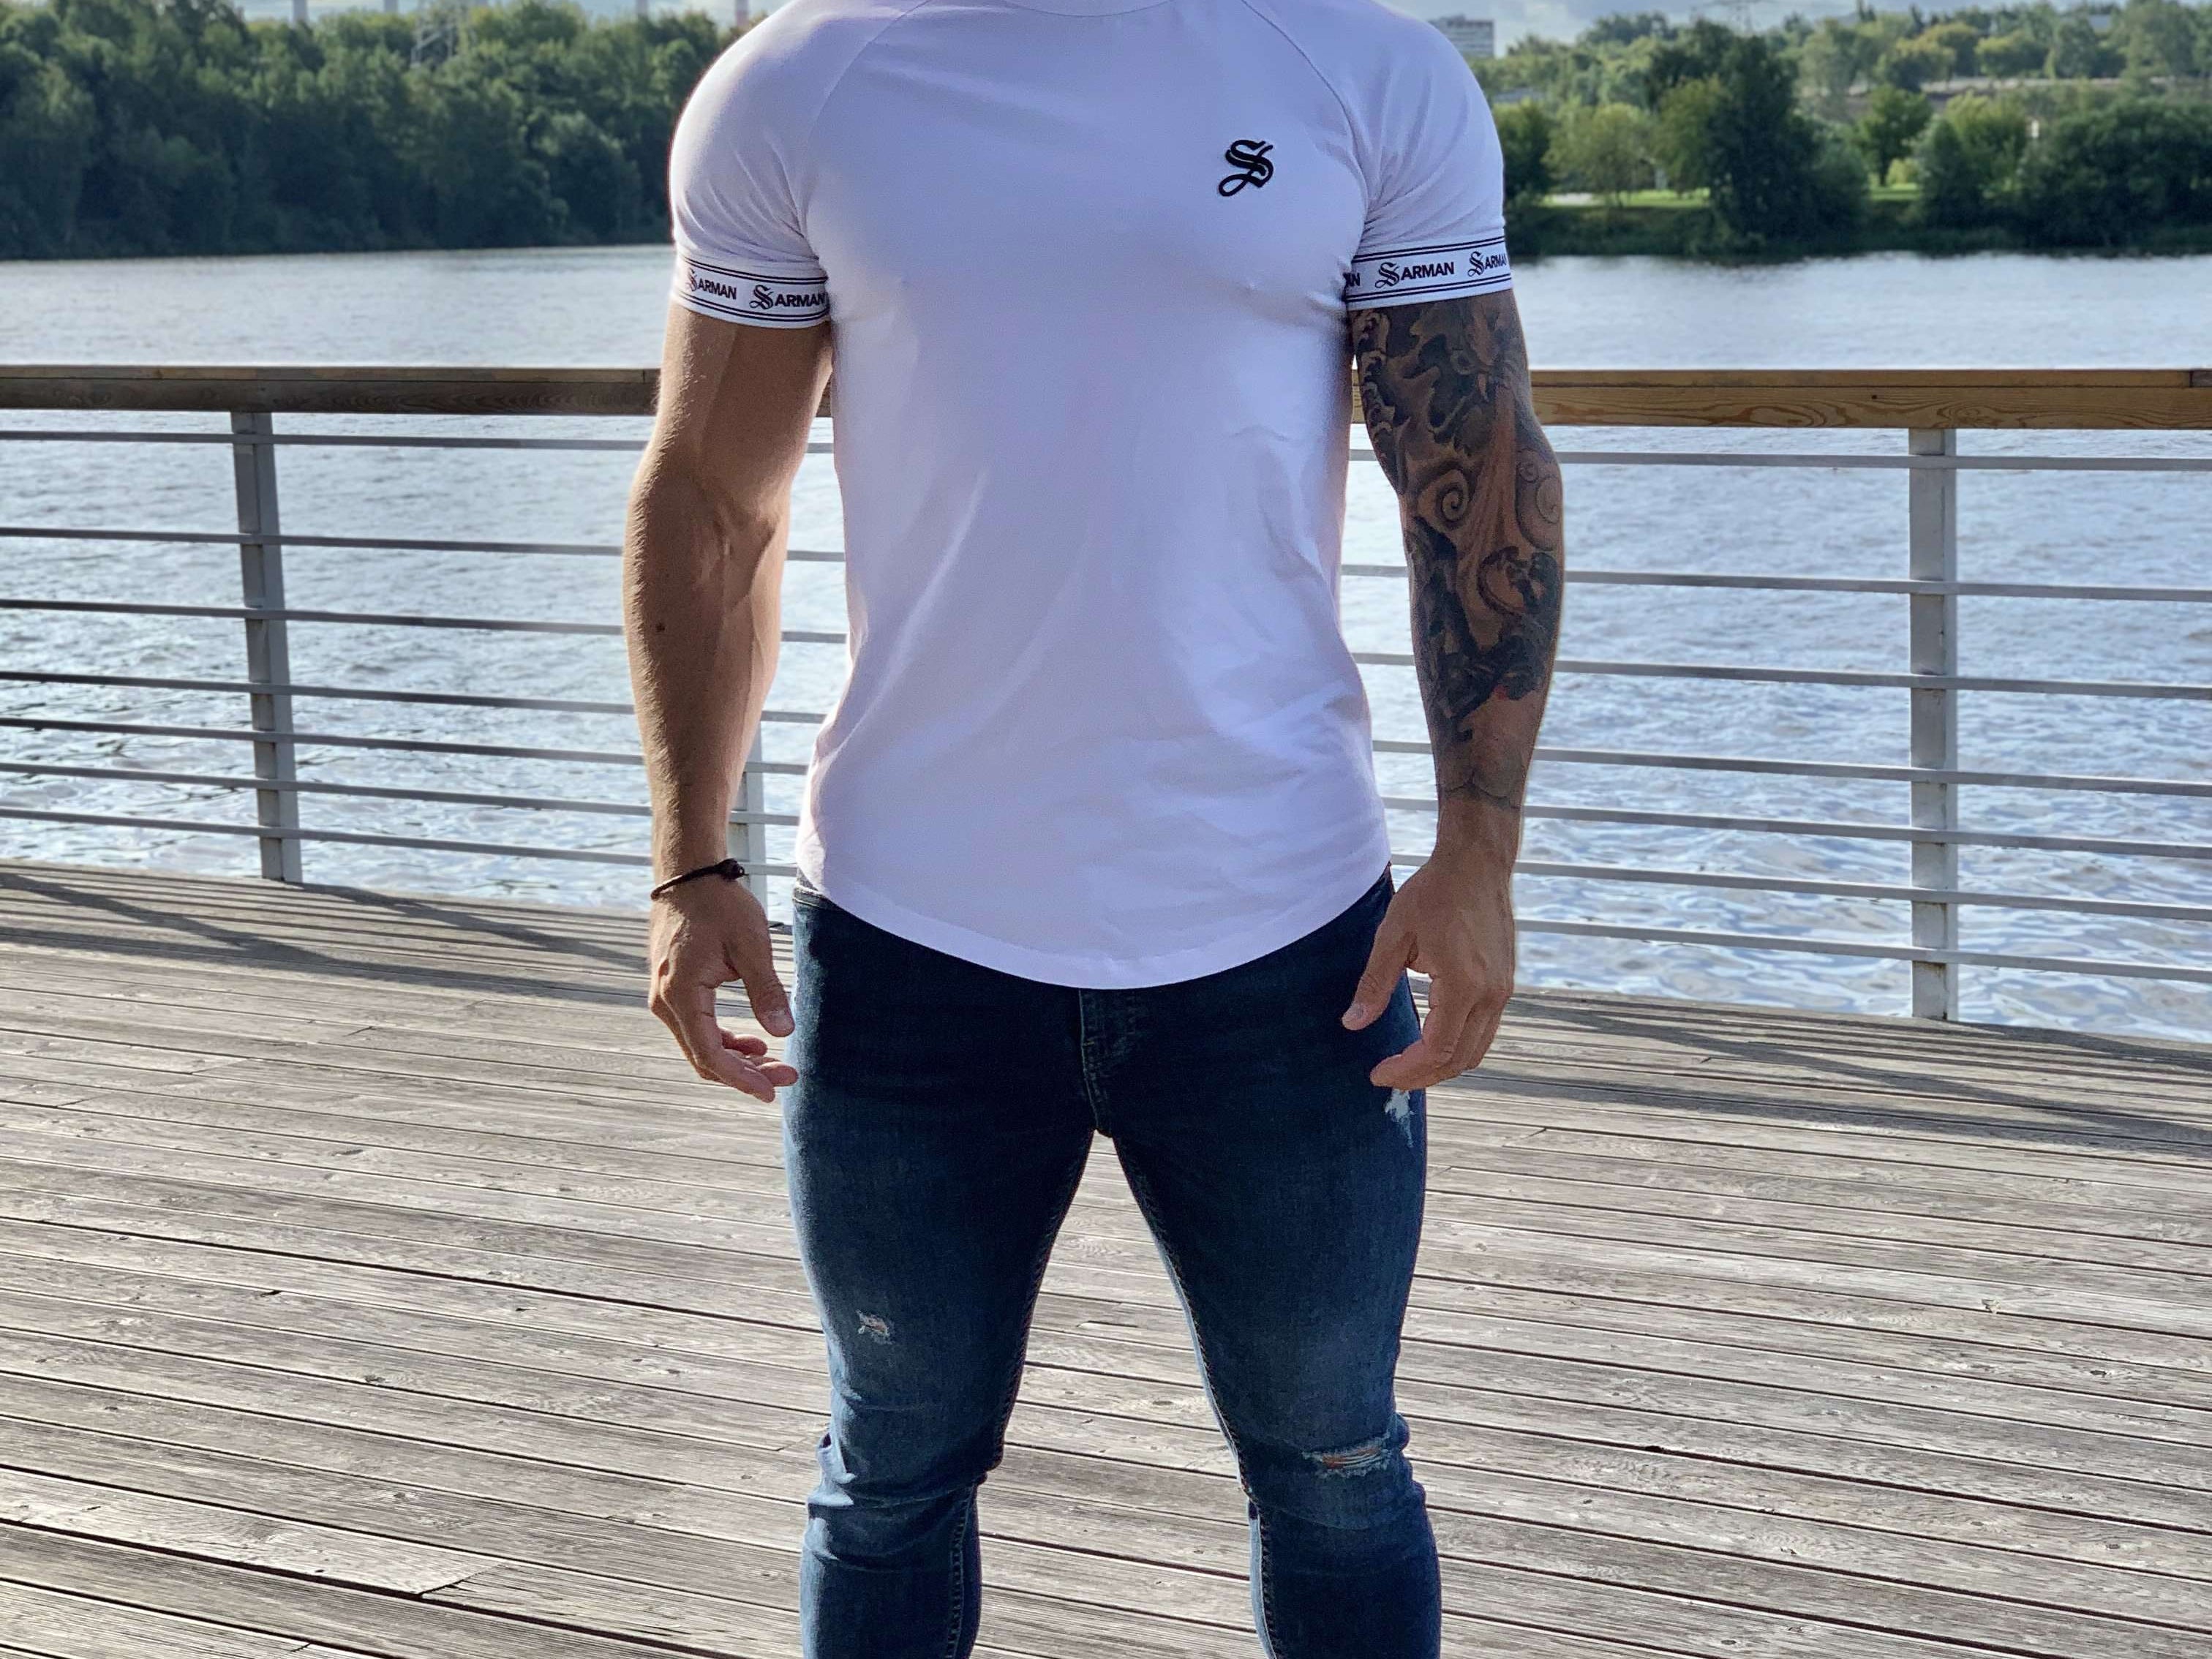 Pure - White T-shirt for Men (PRE-ORDER DISPATCH DATE 25 SEPTEMBER) - Sarman Fashion - Wholesale Clothing Fashion Brand for Men from Canada